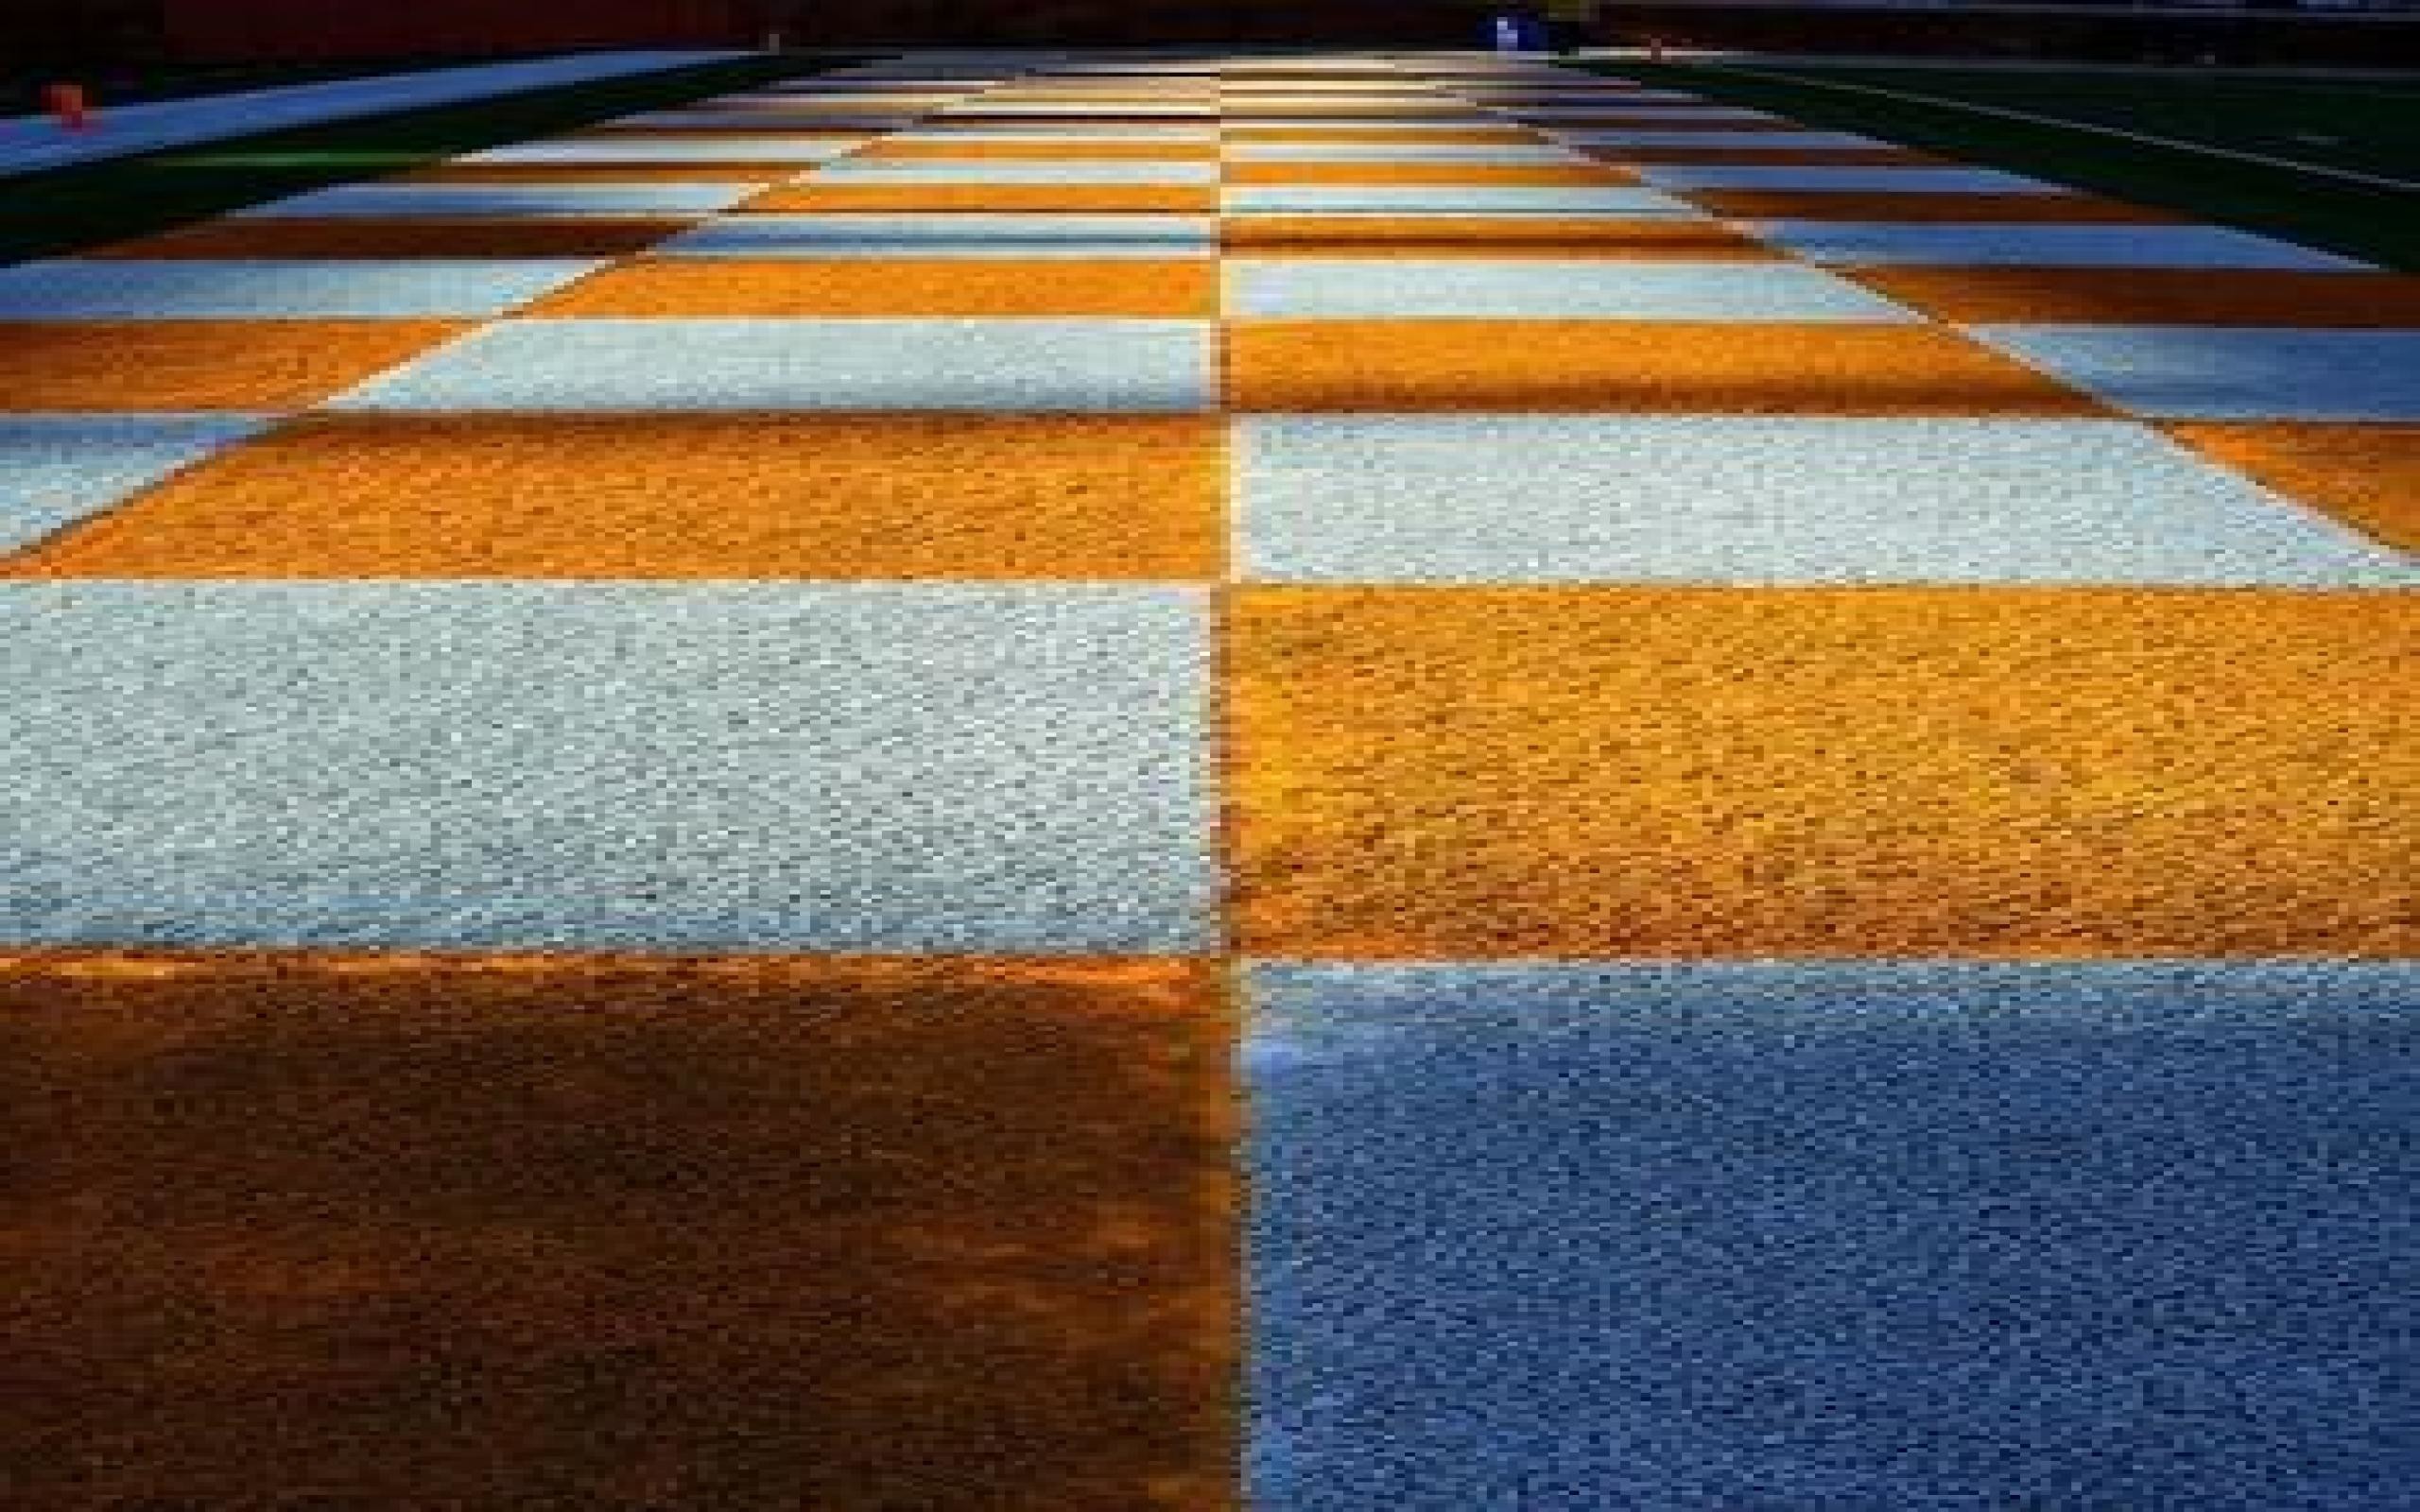 Tennessee Vols Background Wallpaper Image